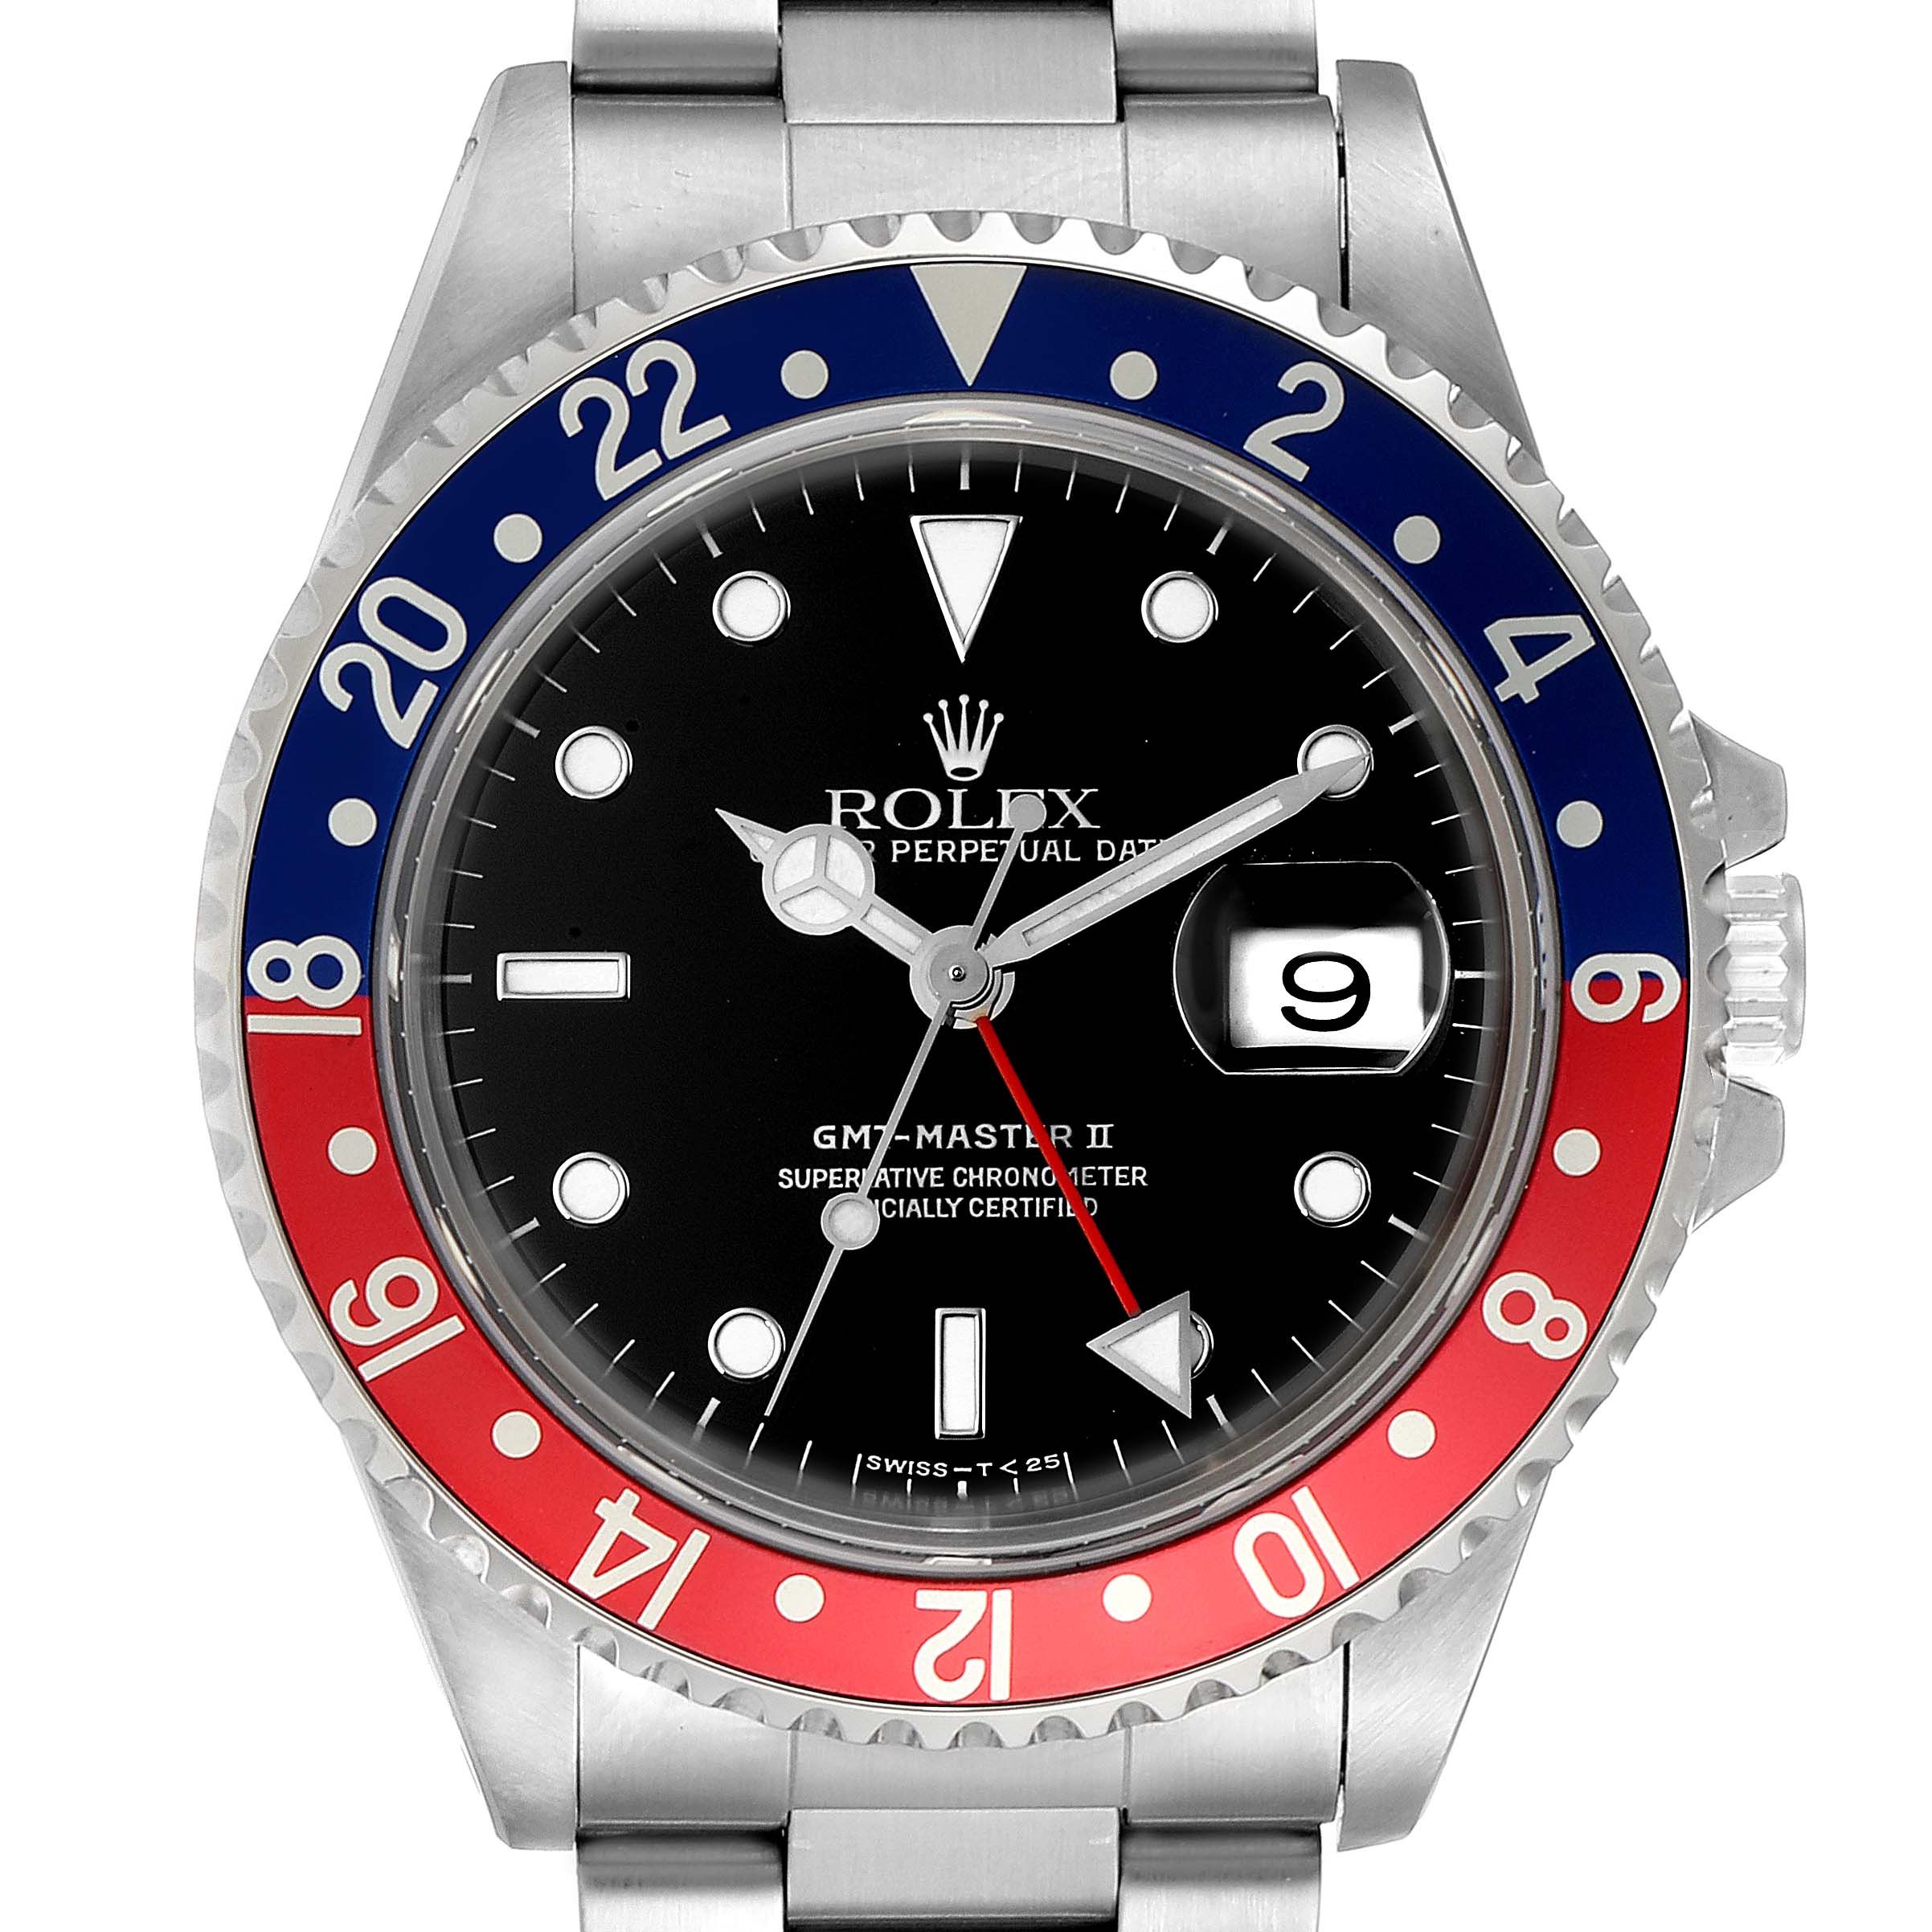 watch with red and blue bezel